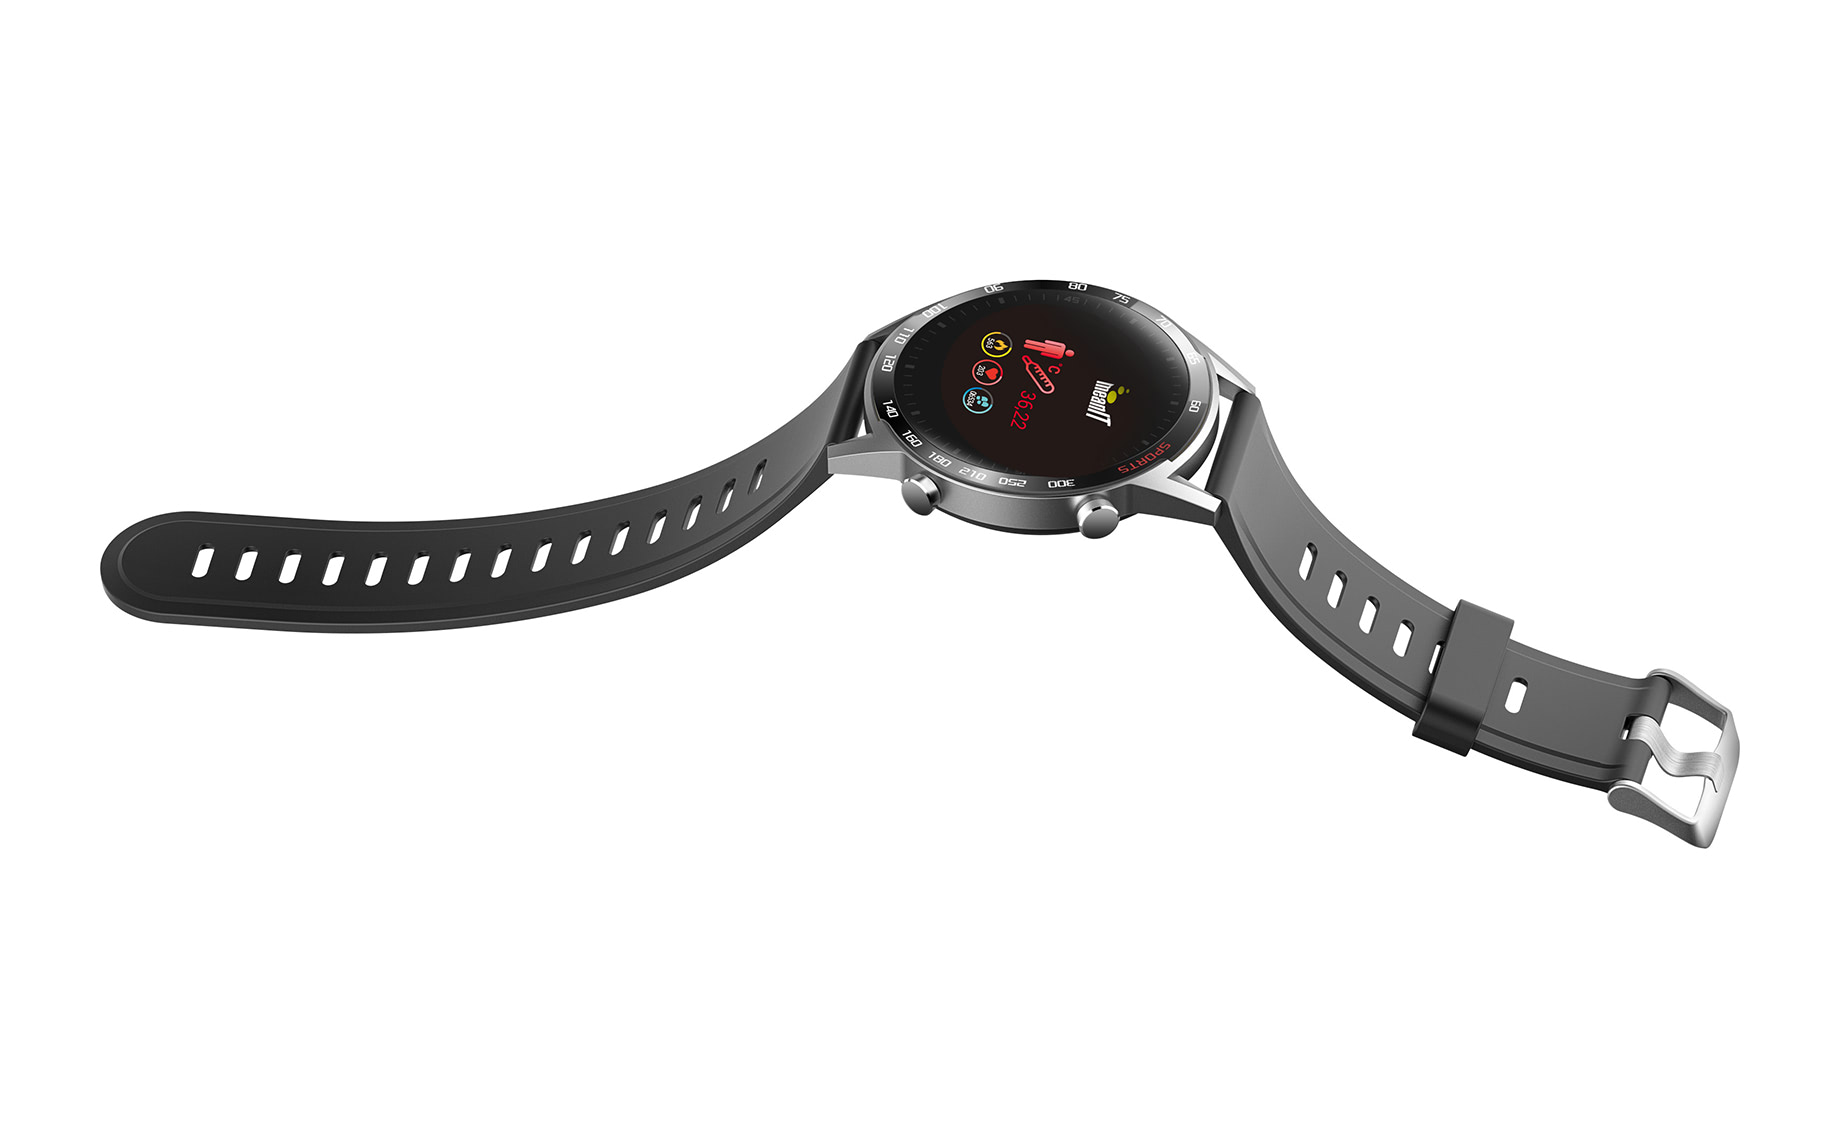 Meanit Smart Watch M20 Termo